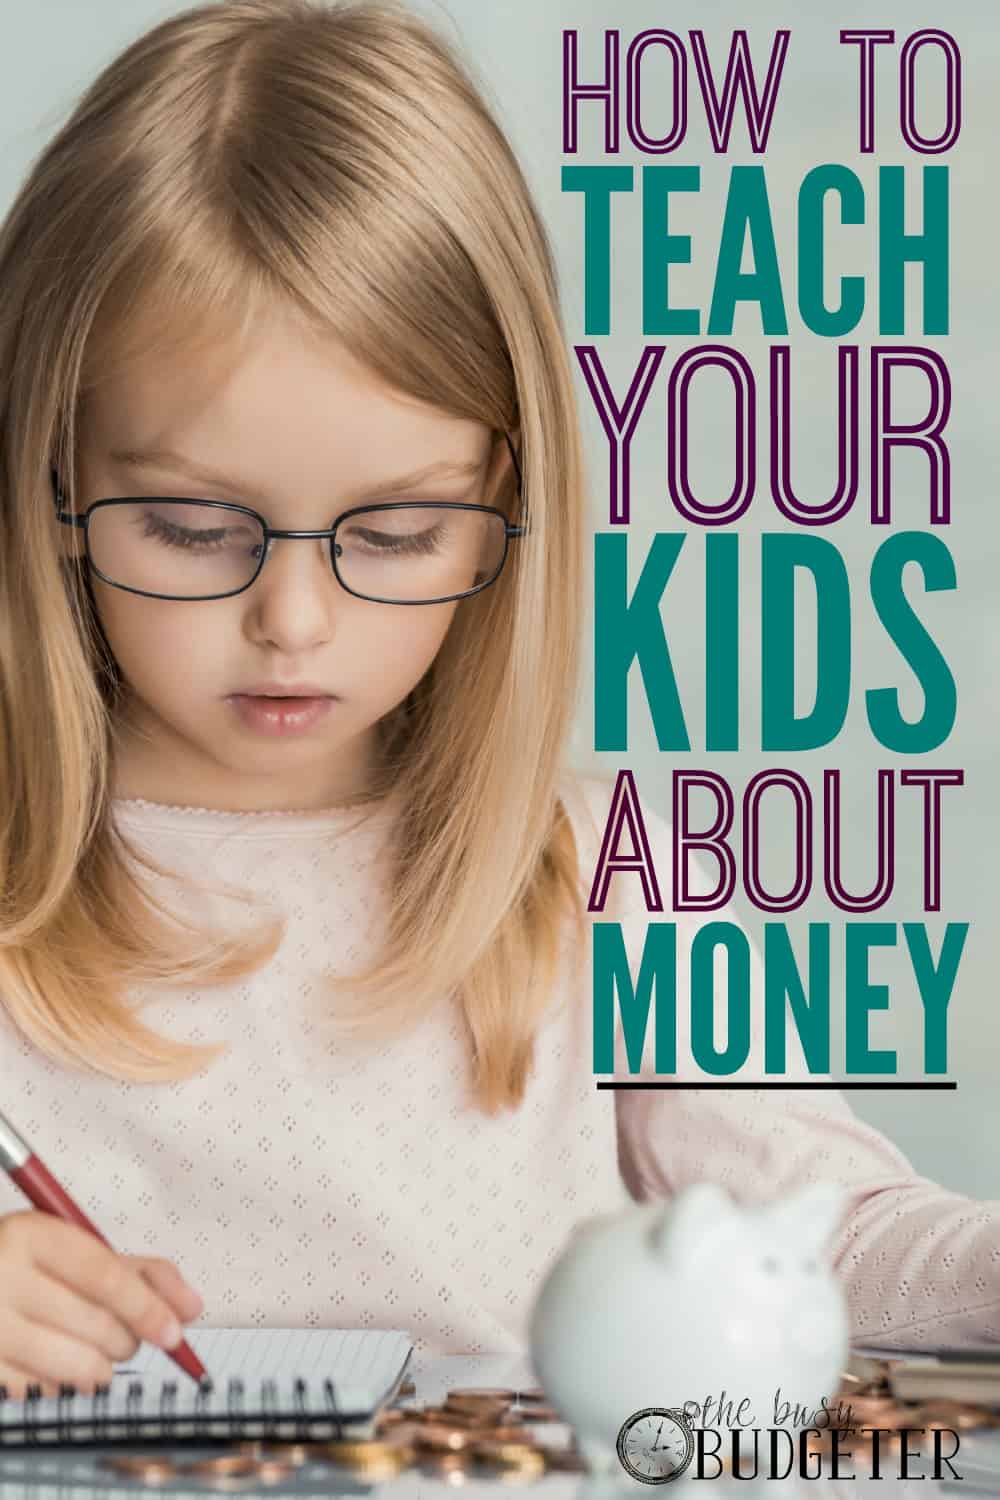 HOW TO TEACH YOUR KIDS ABOUT MONEY